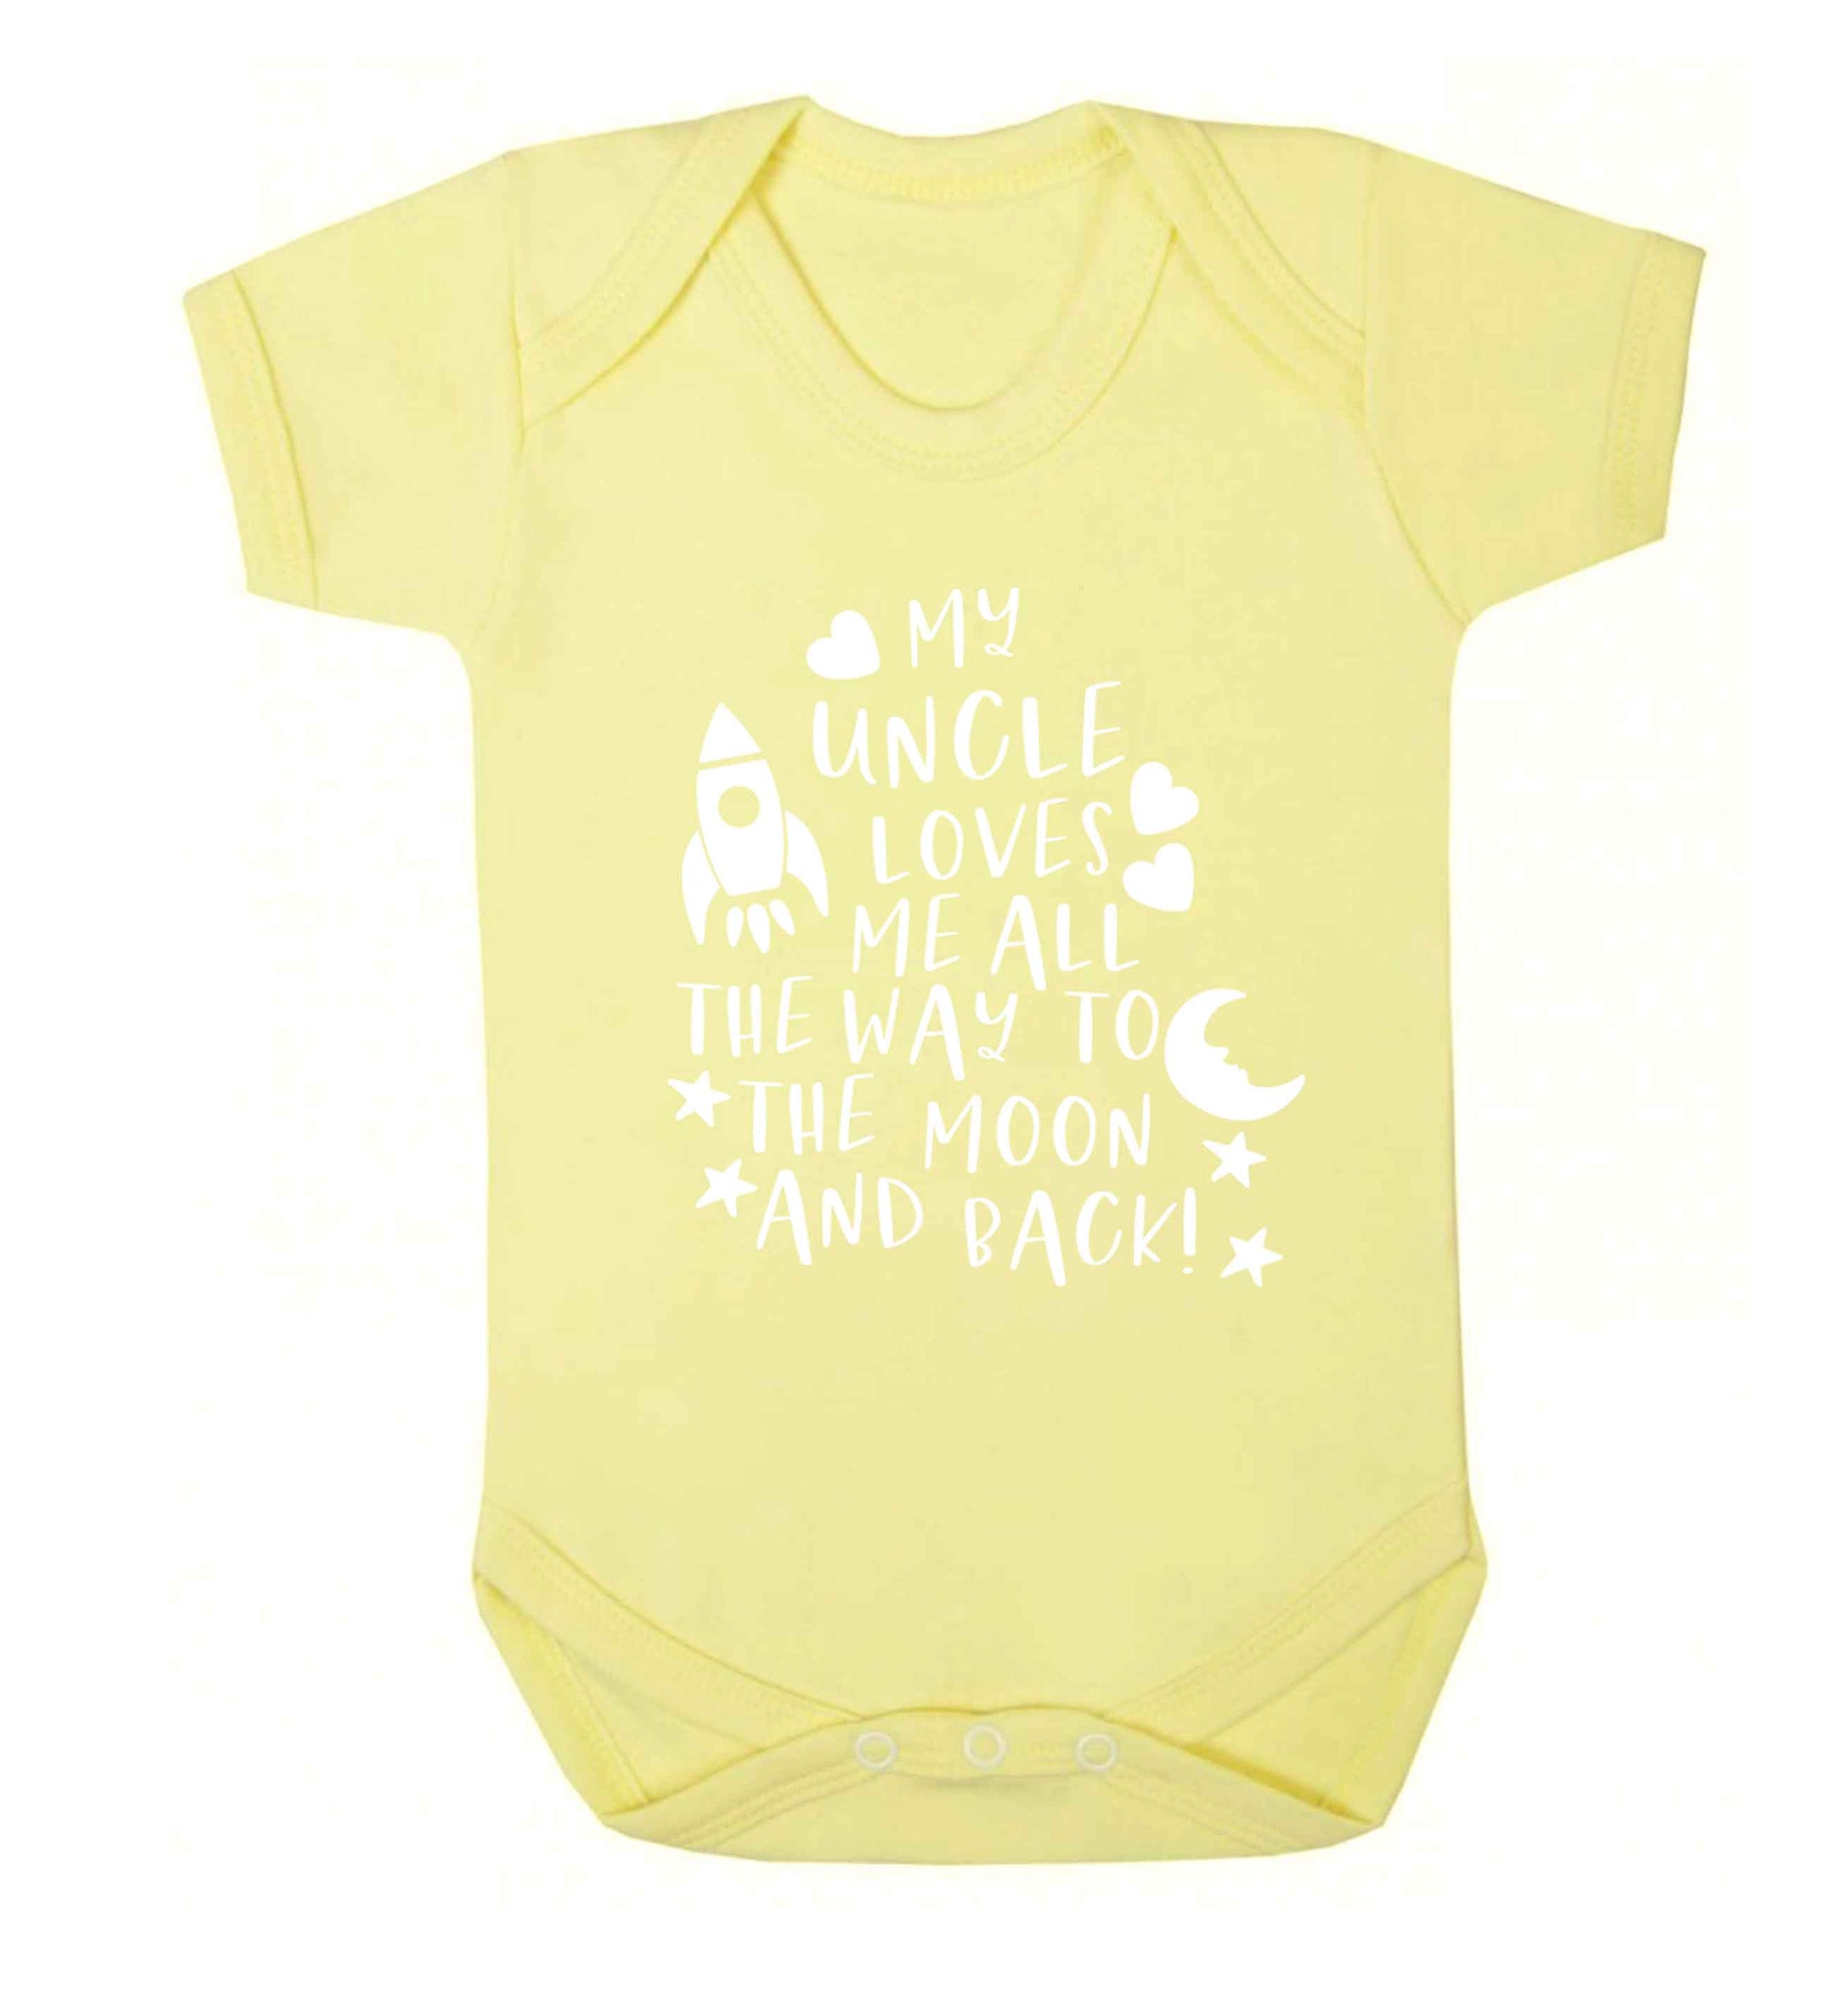 My uncle loves me all the way to the moon and back Baby Vest pale yellow 18-24 months